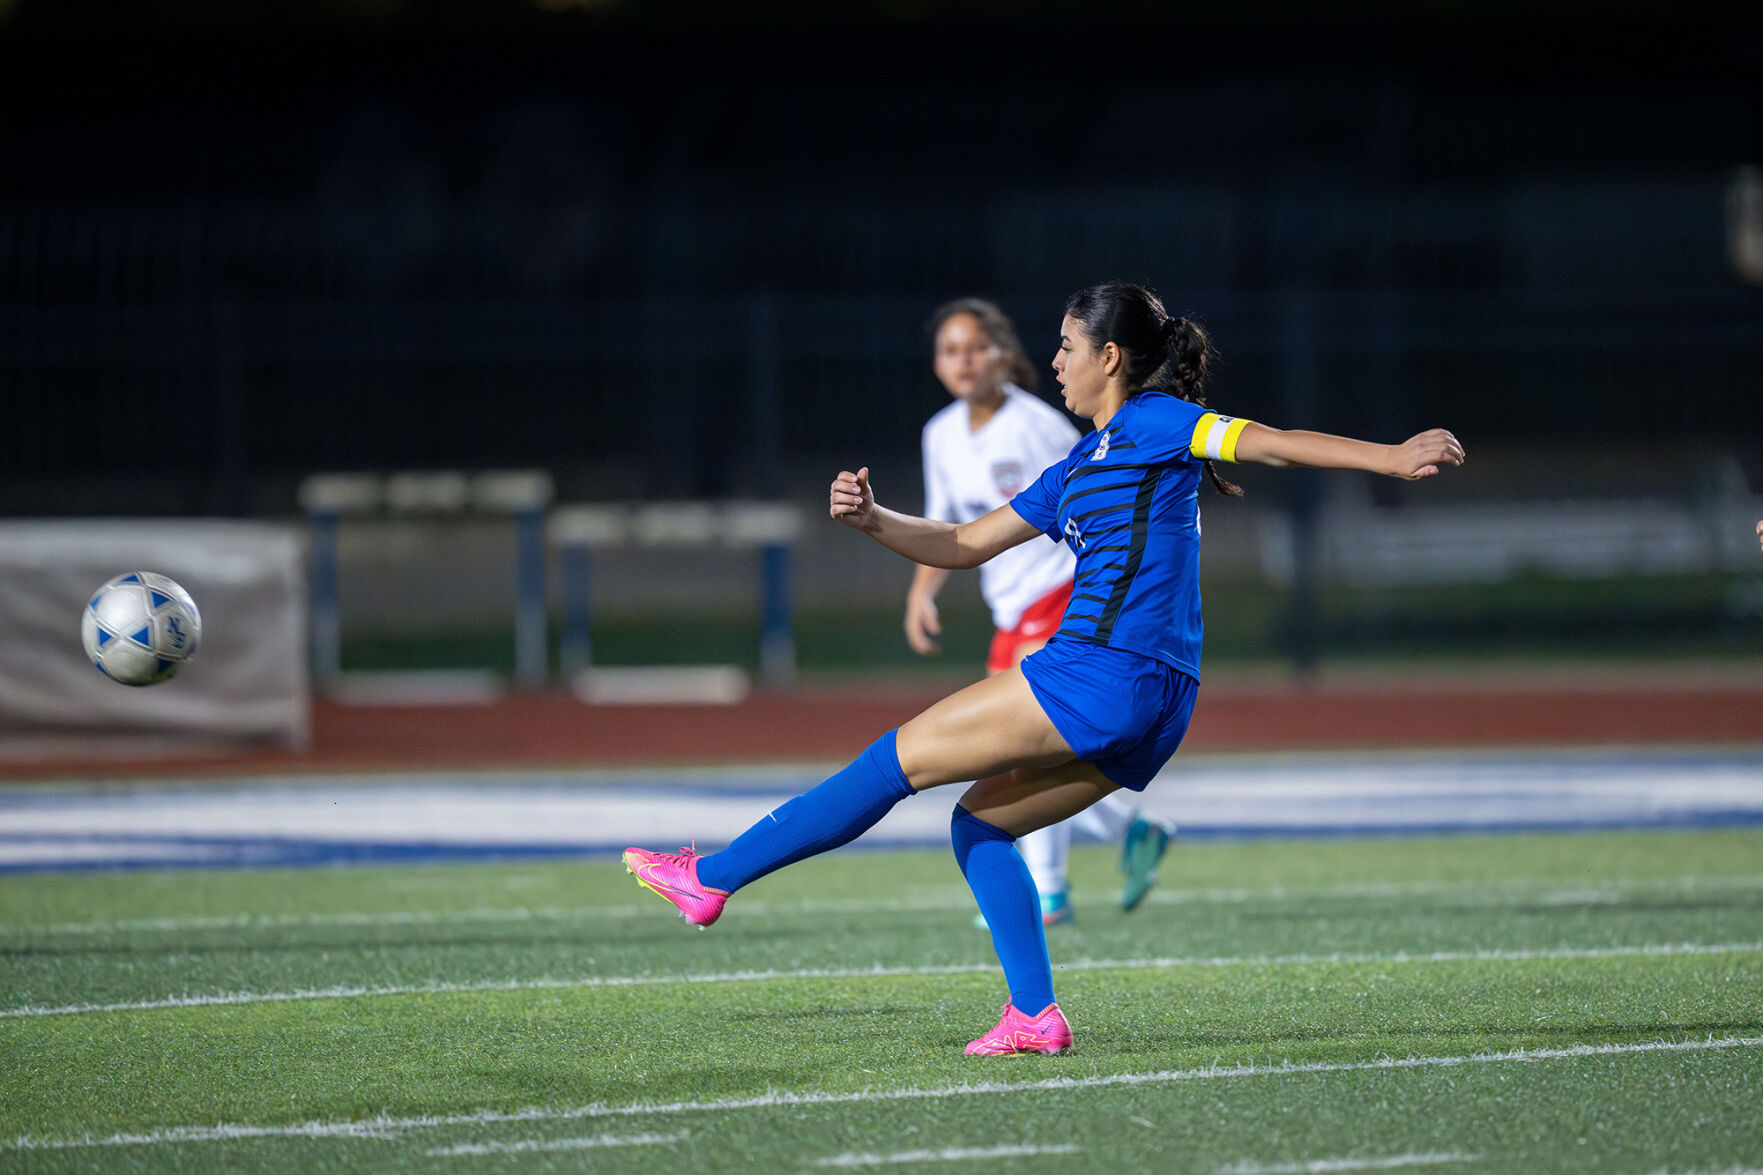 Hannah Sanchez Secures Second Consecutive Game-Winning Goal in New Braunfels Girls Soccer Win